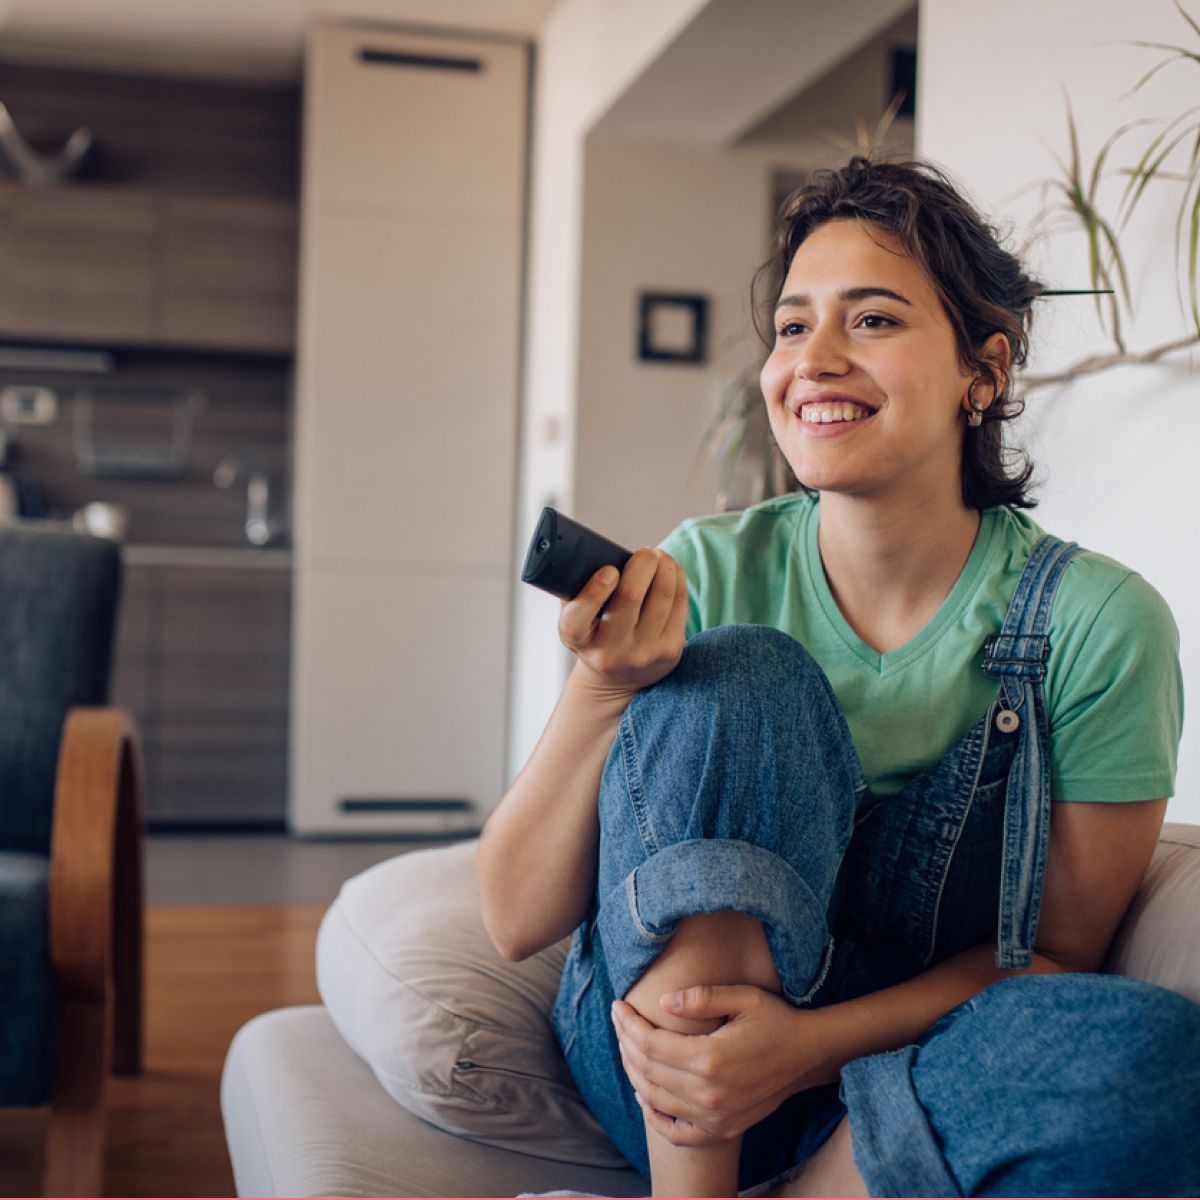 Woman smiling watching TV on couch with remote